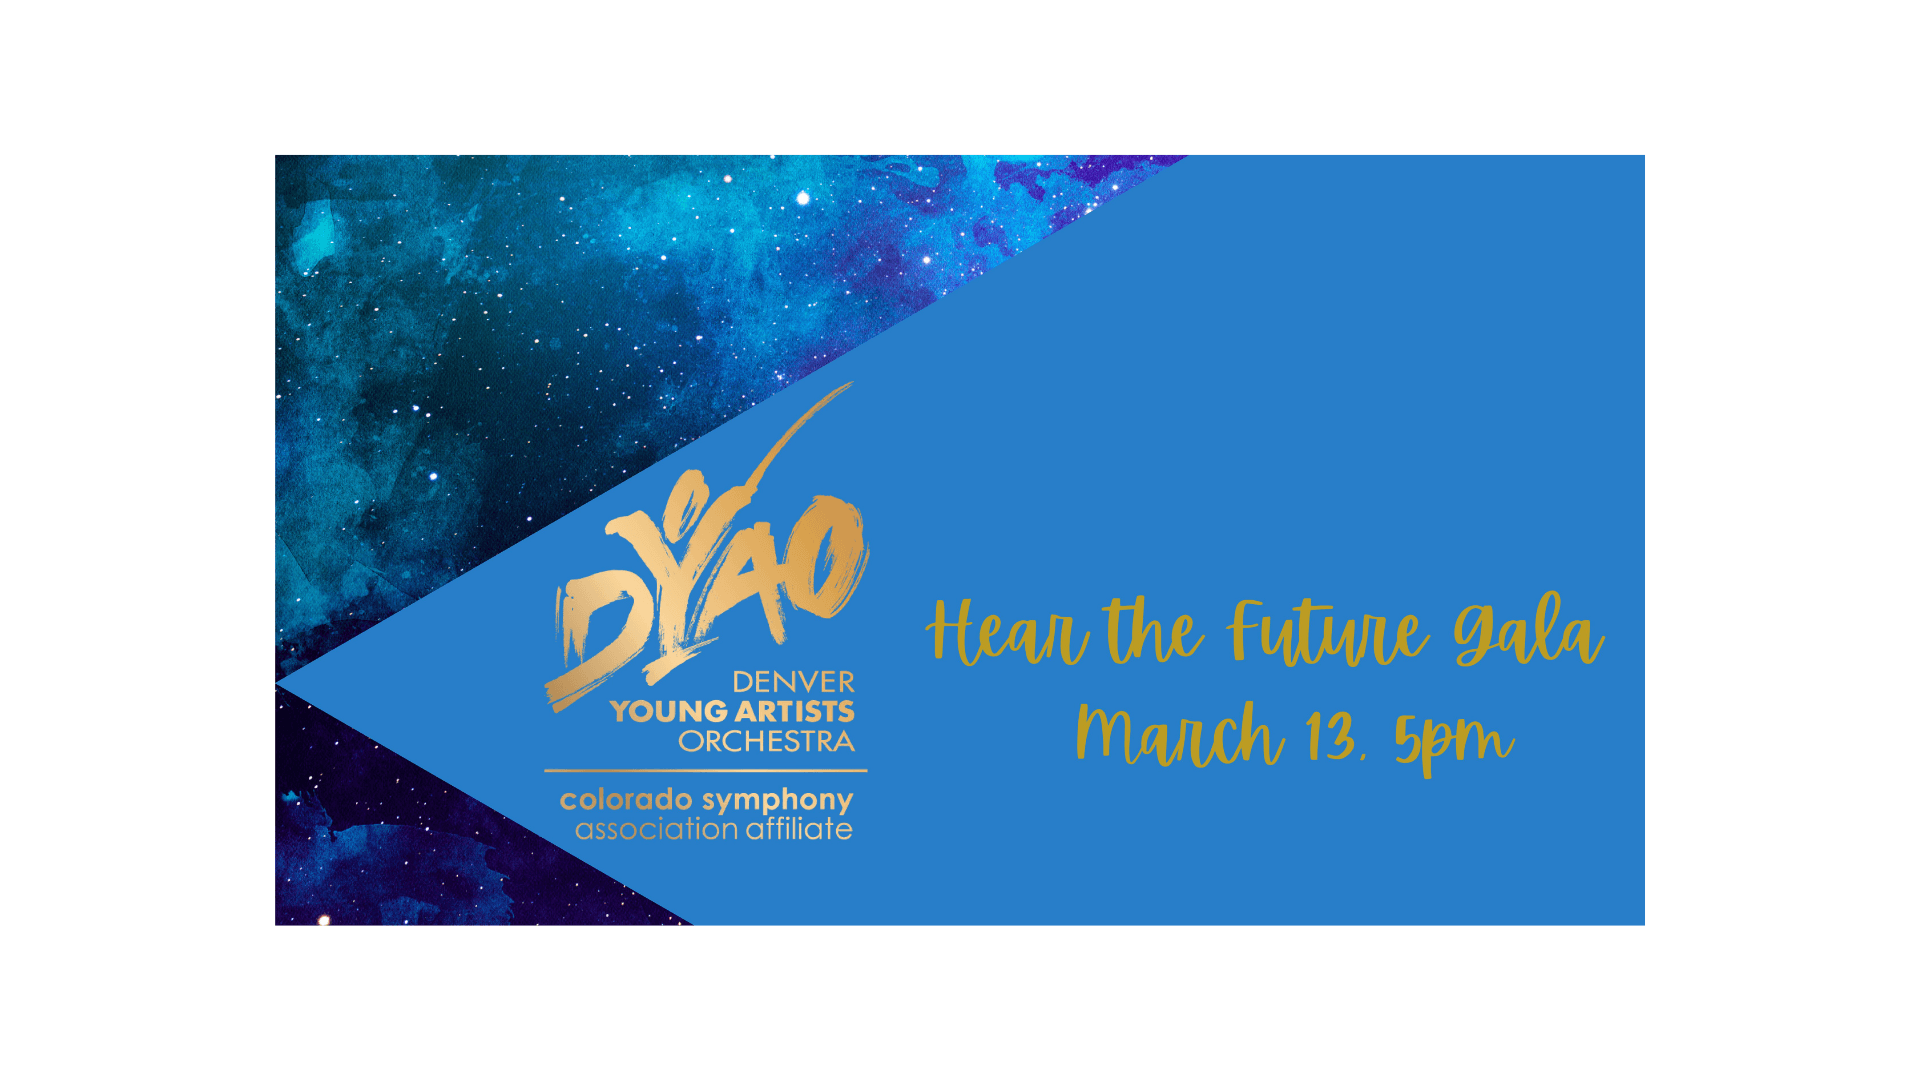 Tickets On Sale Now for 2022 Hear the Future Gala!